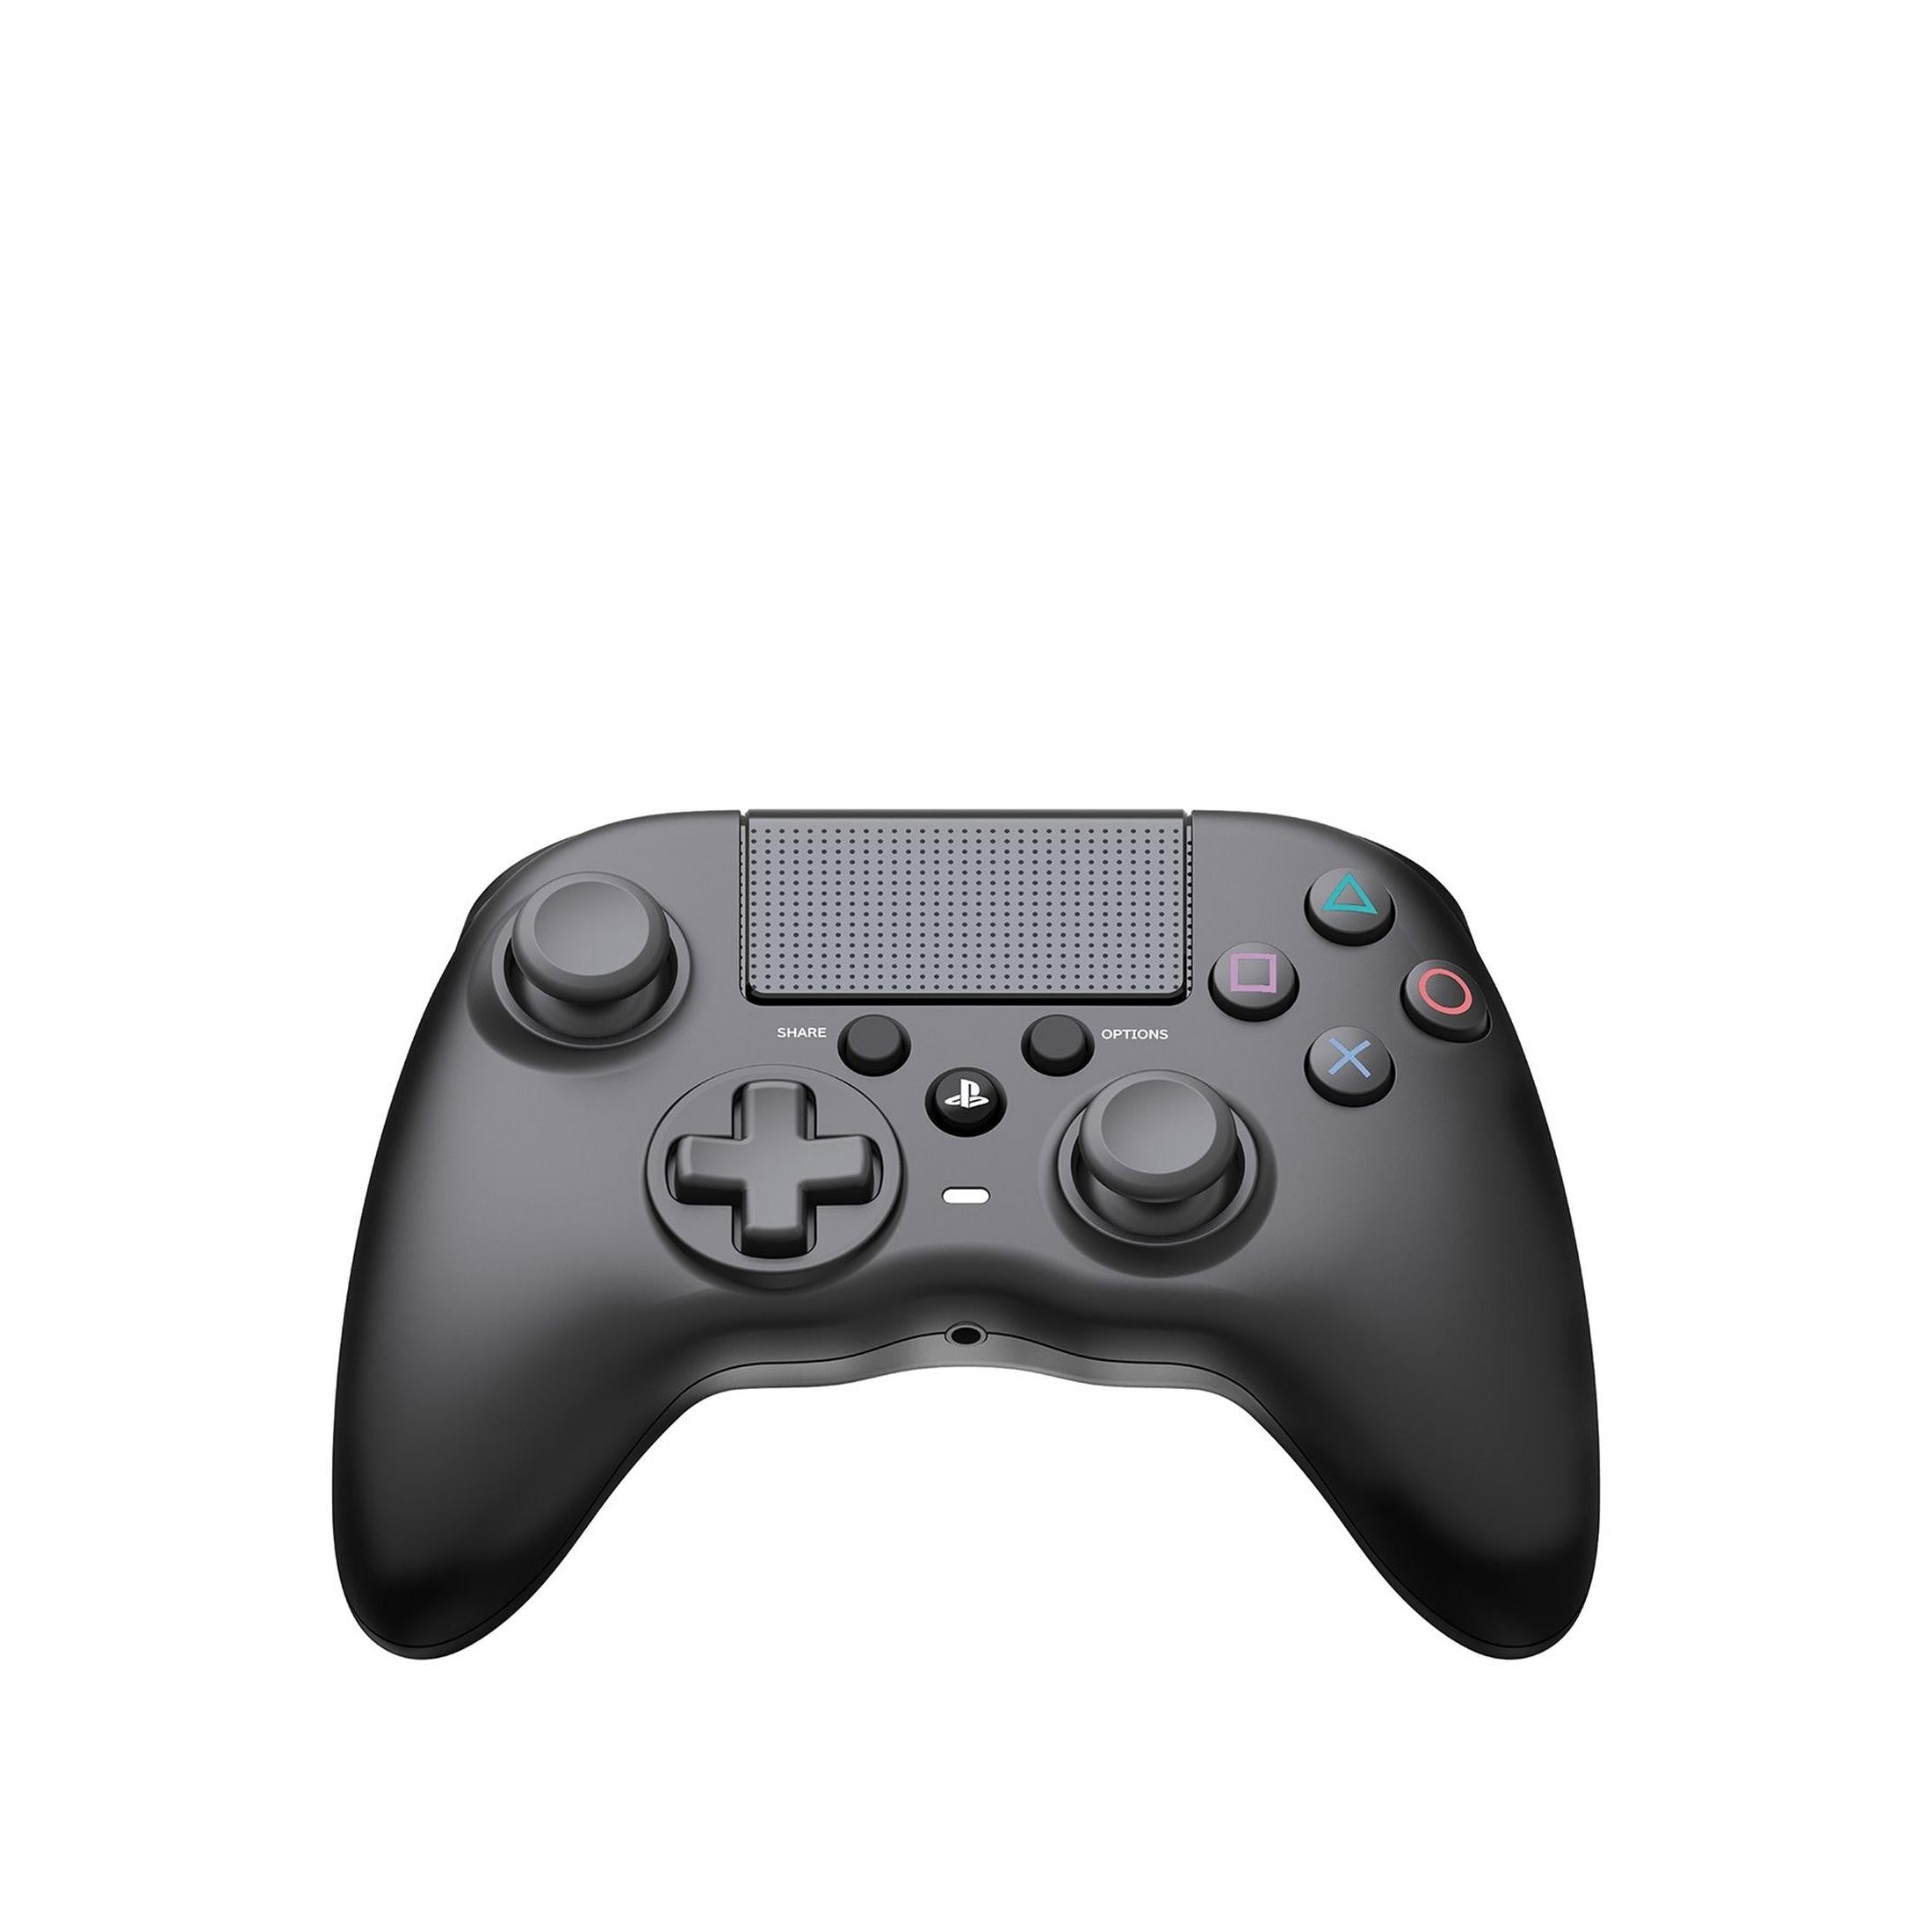 Hori Onyx + Wireless Controller for PS4 - Black